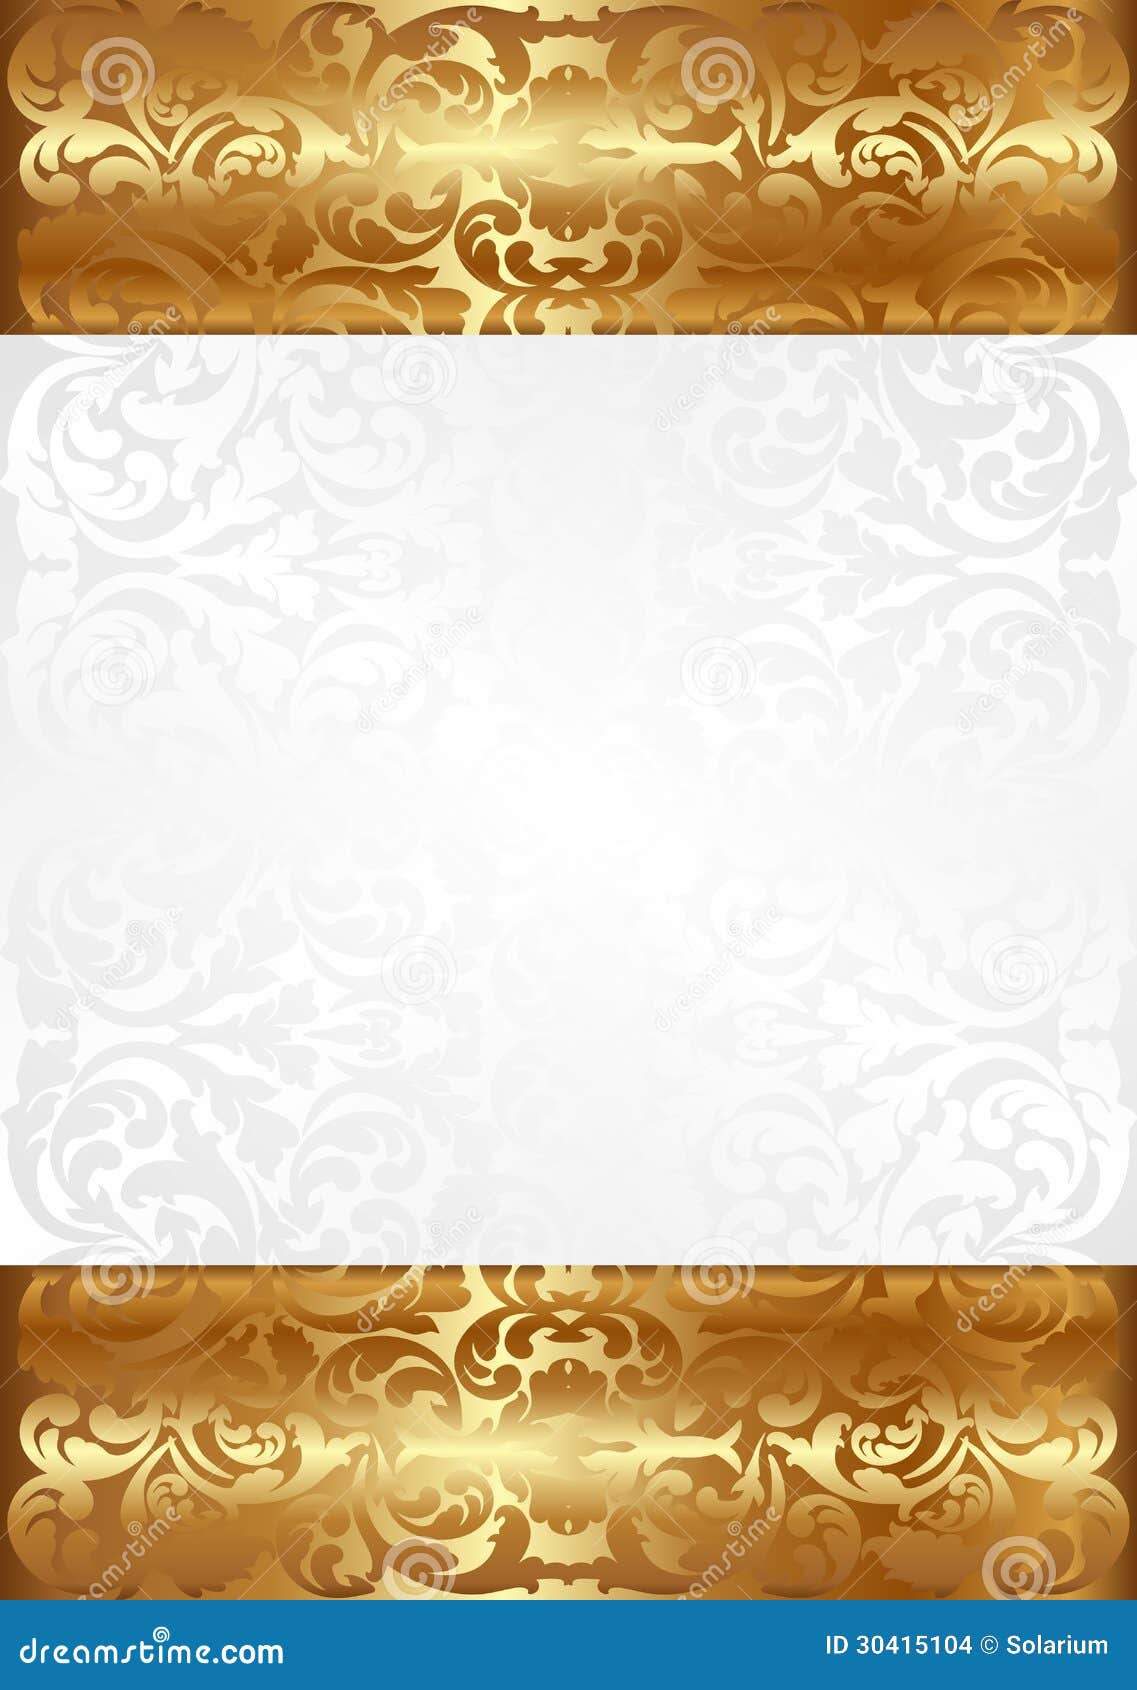 White and gold  background stock vector Illustration of 